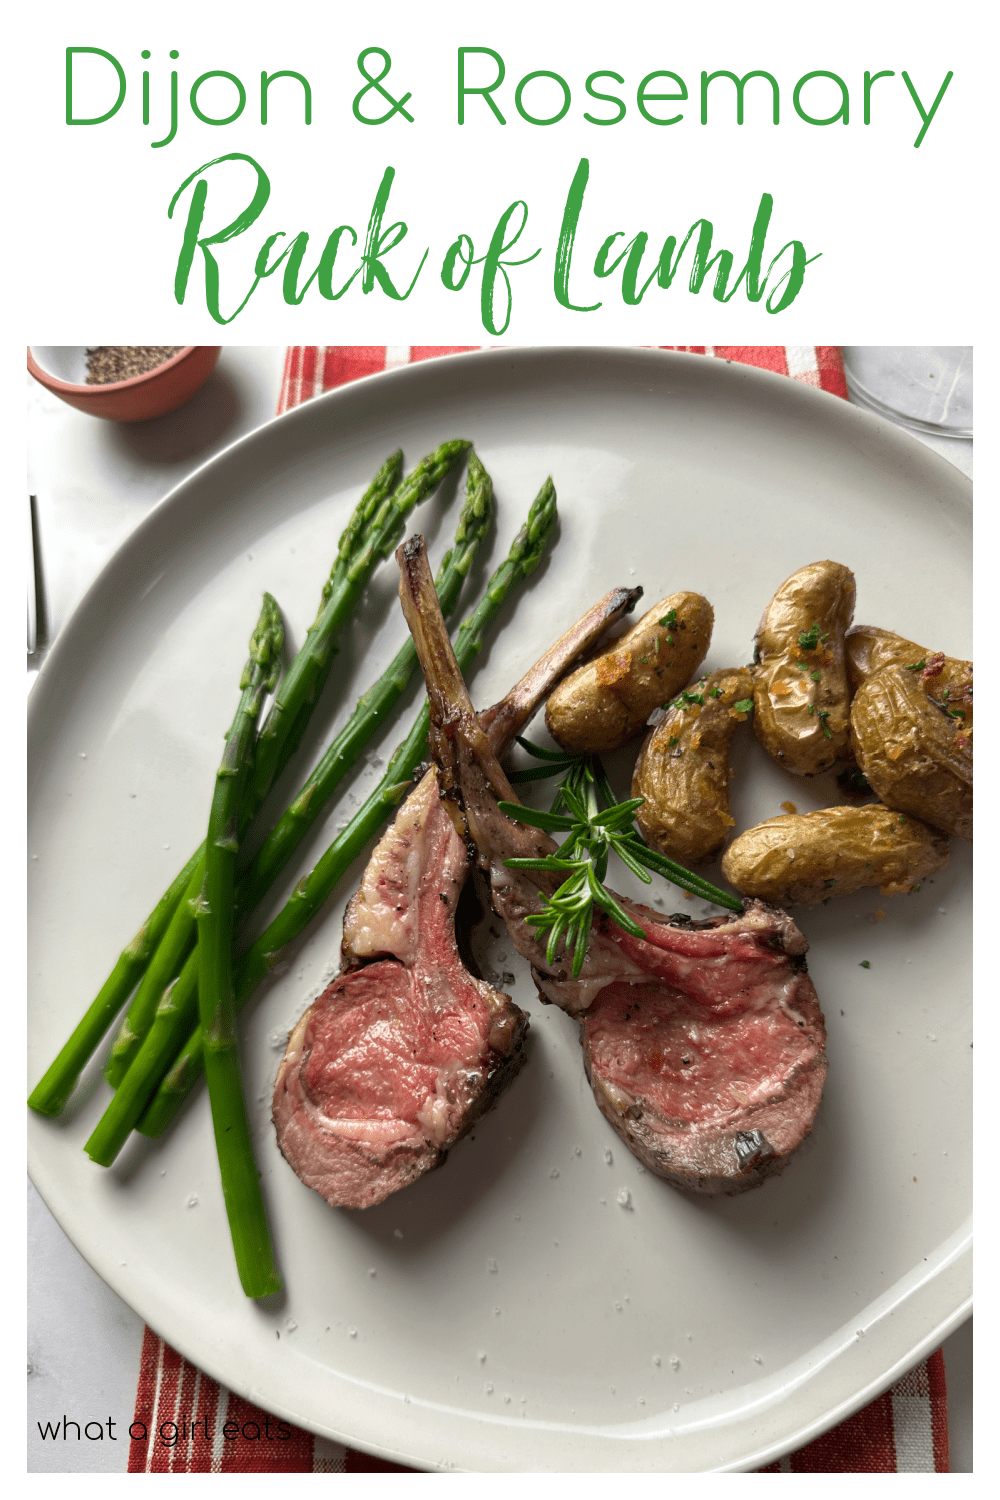 Rack of lamb with Dijon, rosemary and olive oil marinade. Perfectly roasted to rosy rare. Ready in under 45 minutes!